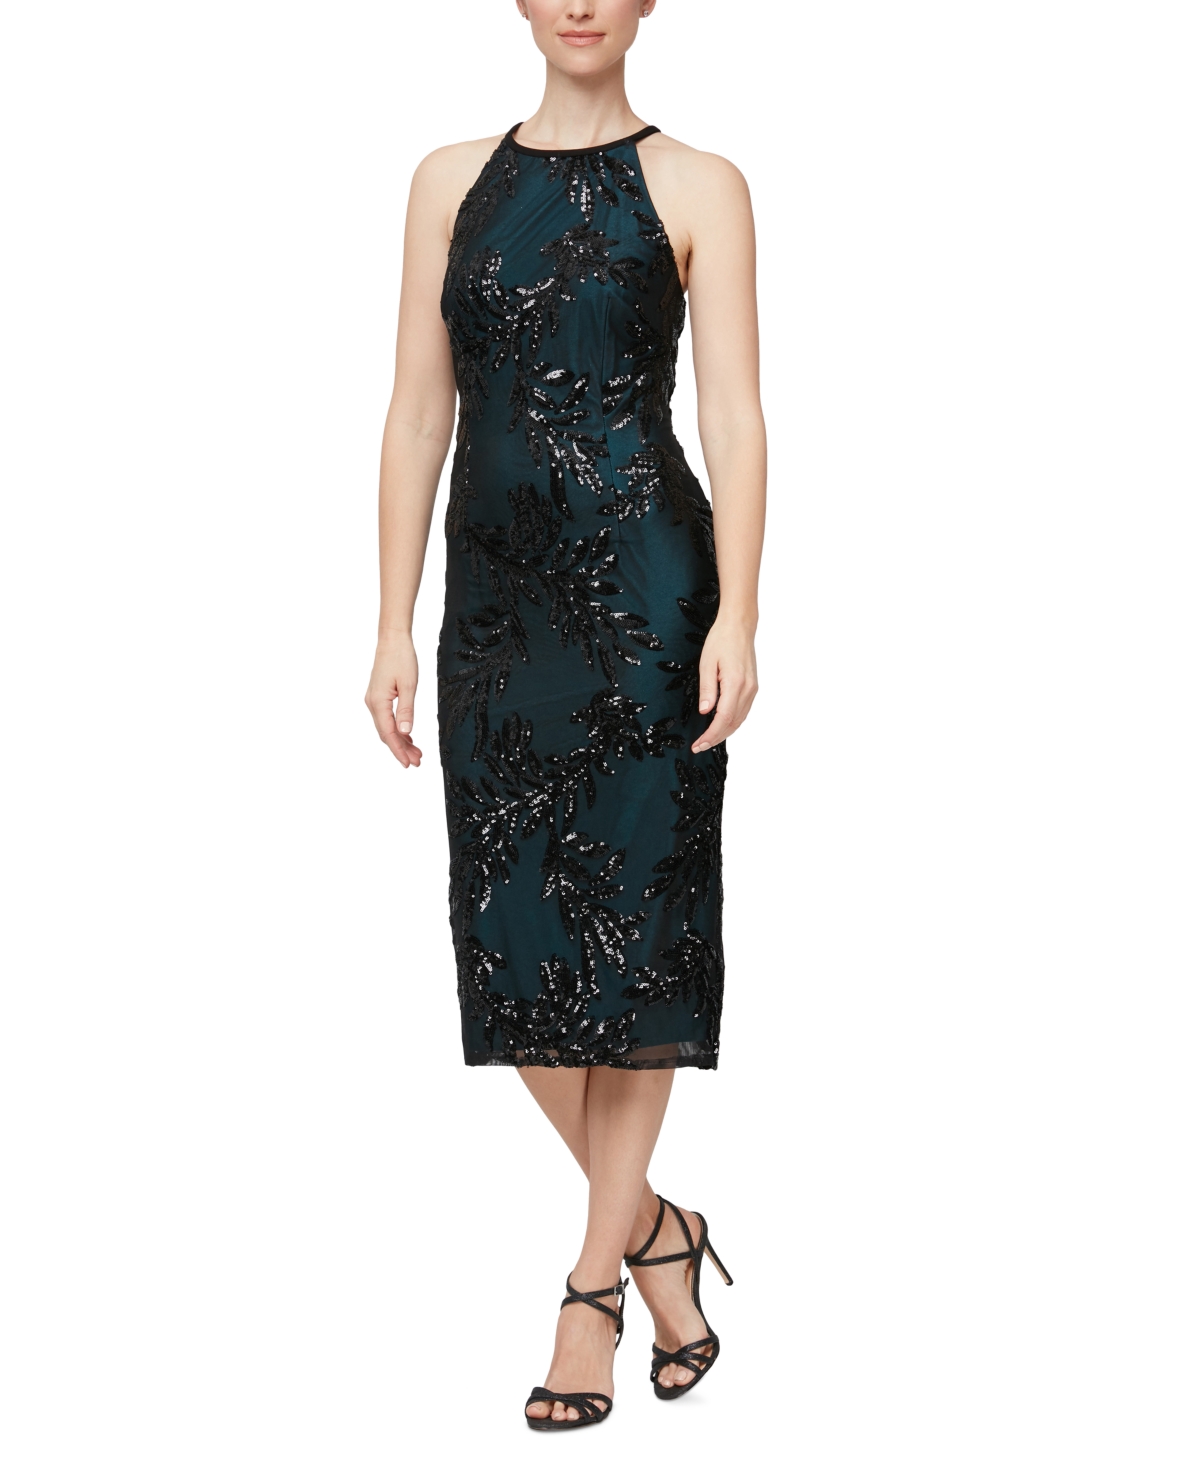 Women's Sequined Embroidered Halter-Neck Midi Sheath Dress - Black/Teal